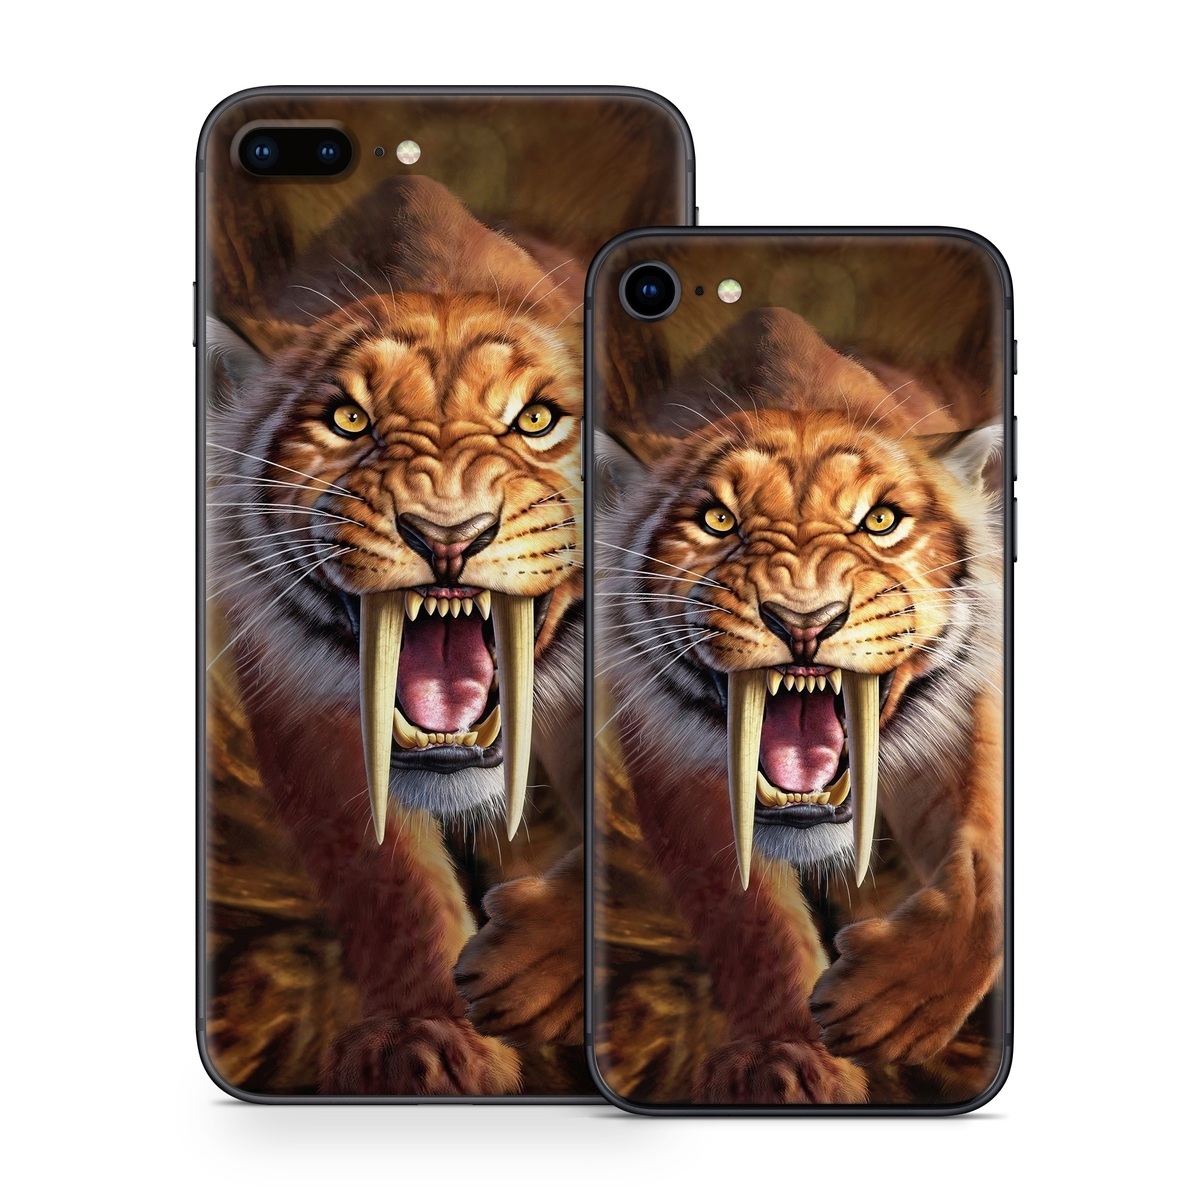 iPhone 8 Series Skin design of Roar, Felidae, Facial expression, Wildlife, Whiskers, Bengal tiger, Carnivore, Snout, Big cats, Fang, with black, orange, yellow, white colors